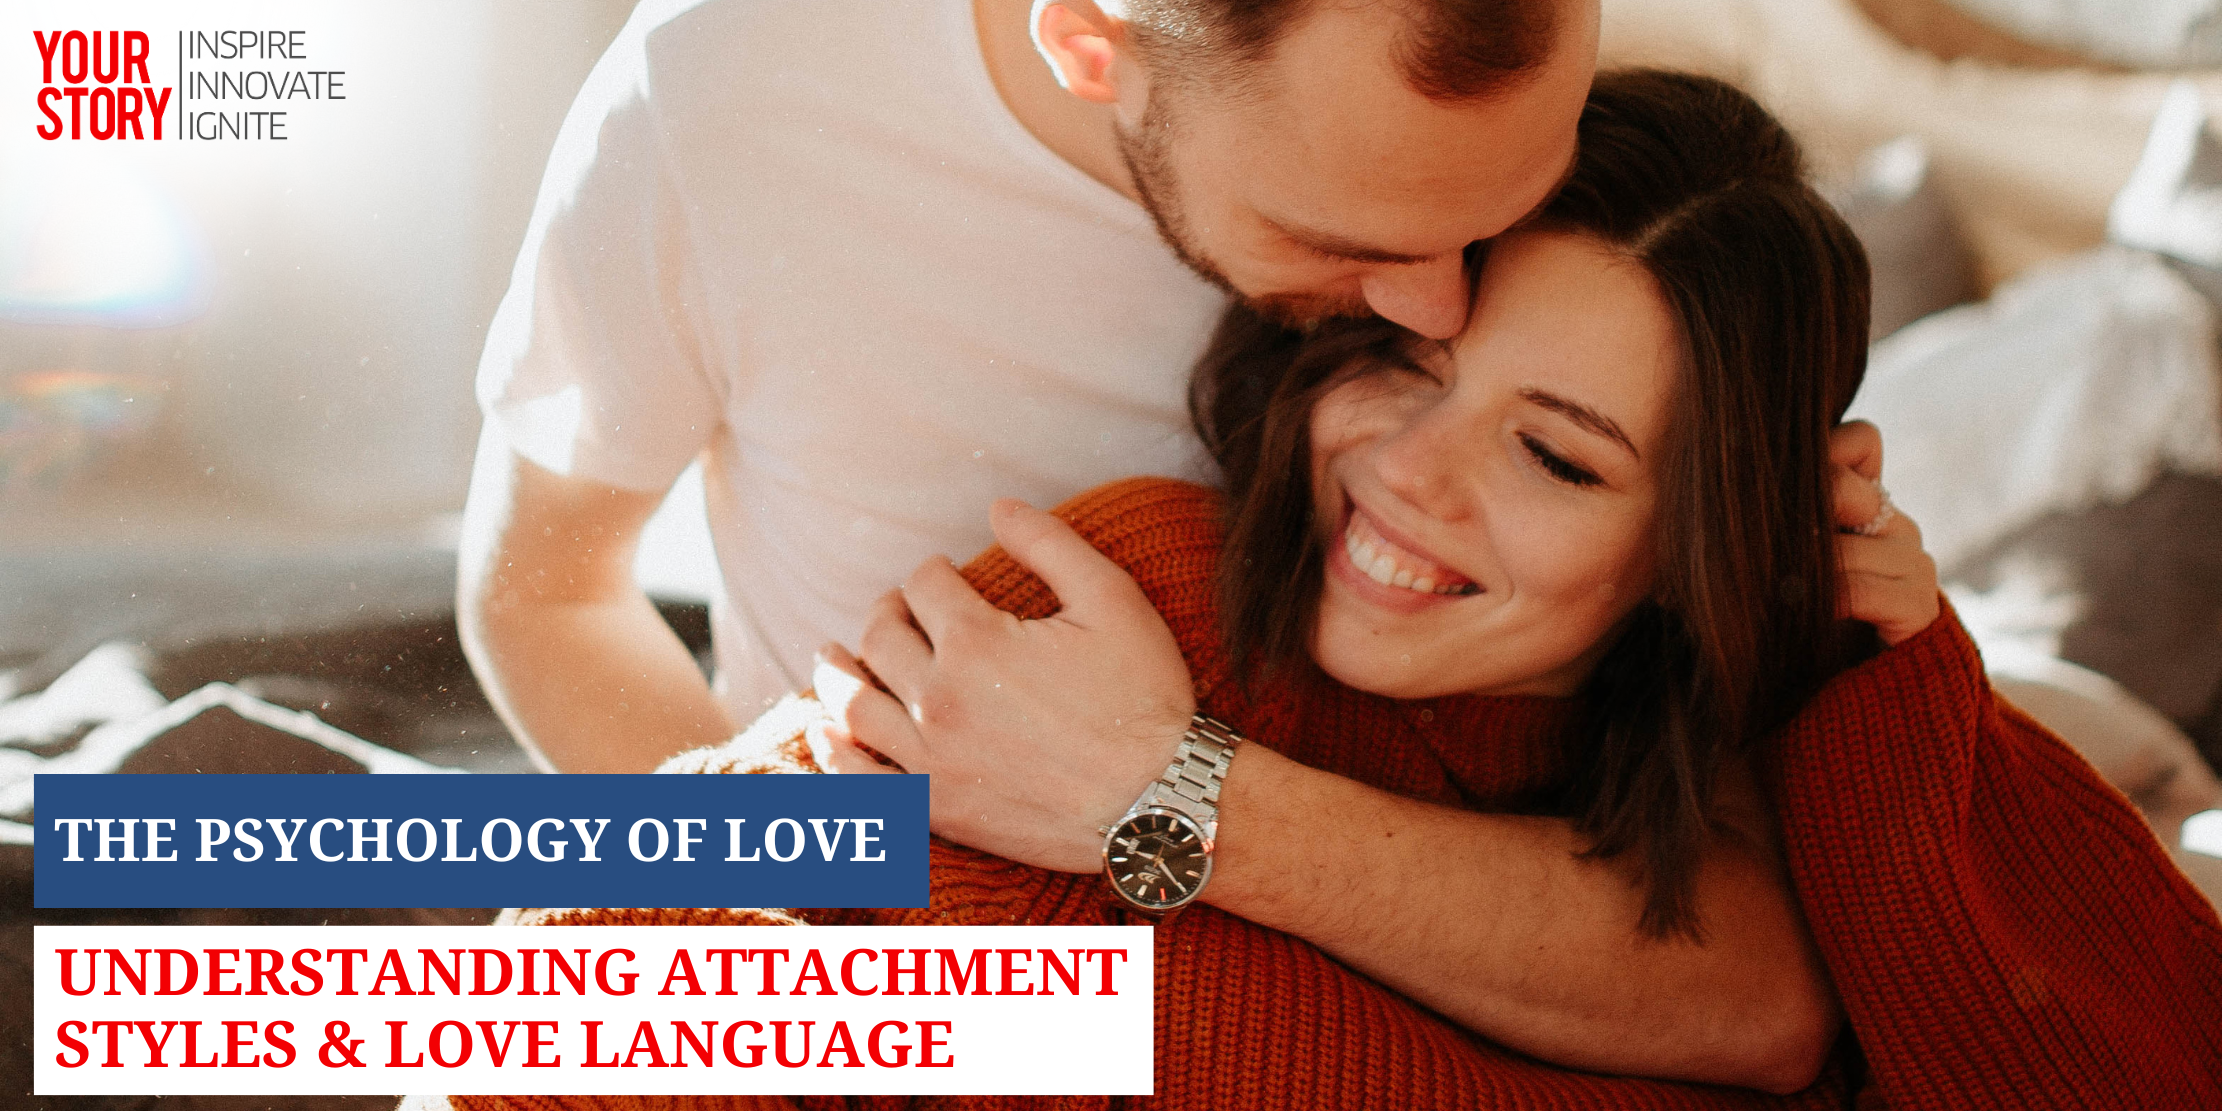 ⁠⁠The Psychology of Love: Understanding Attachment Styles & Love Language